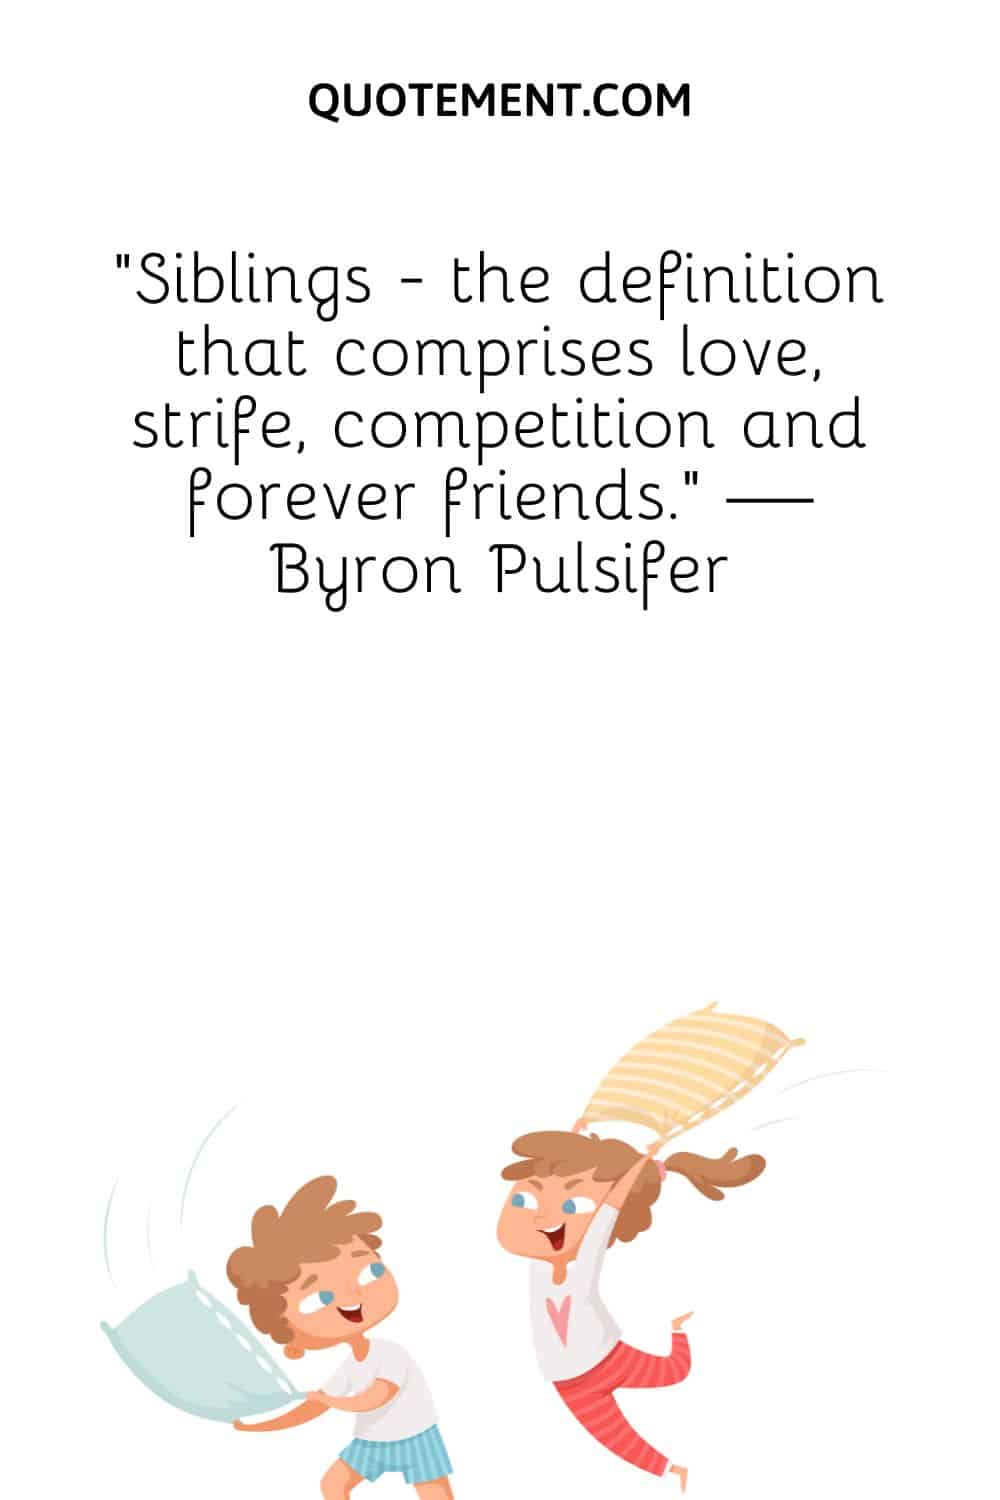 Siblings - the definition that comprises love, strife, competition and forever friends